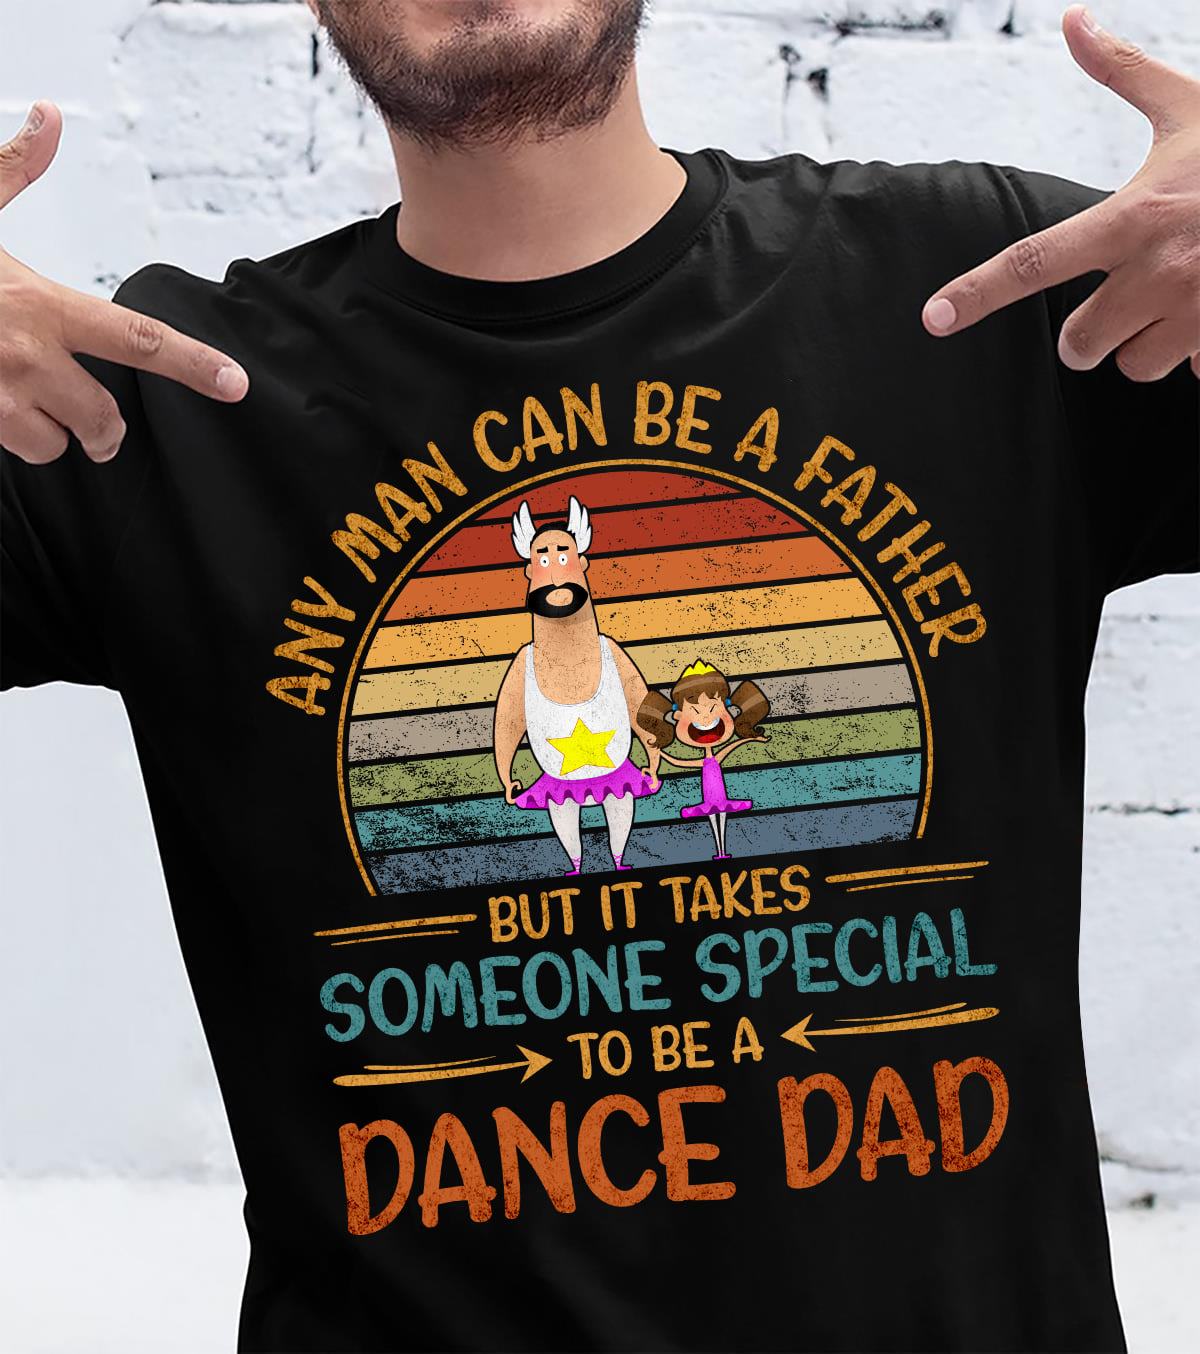 Any man can be a father but it takes someone special to be a dance dad